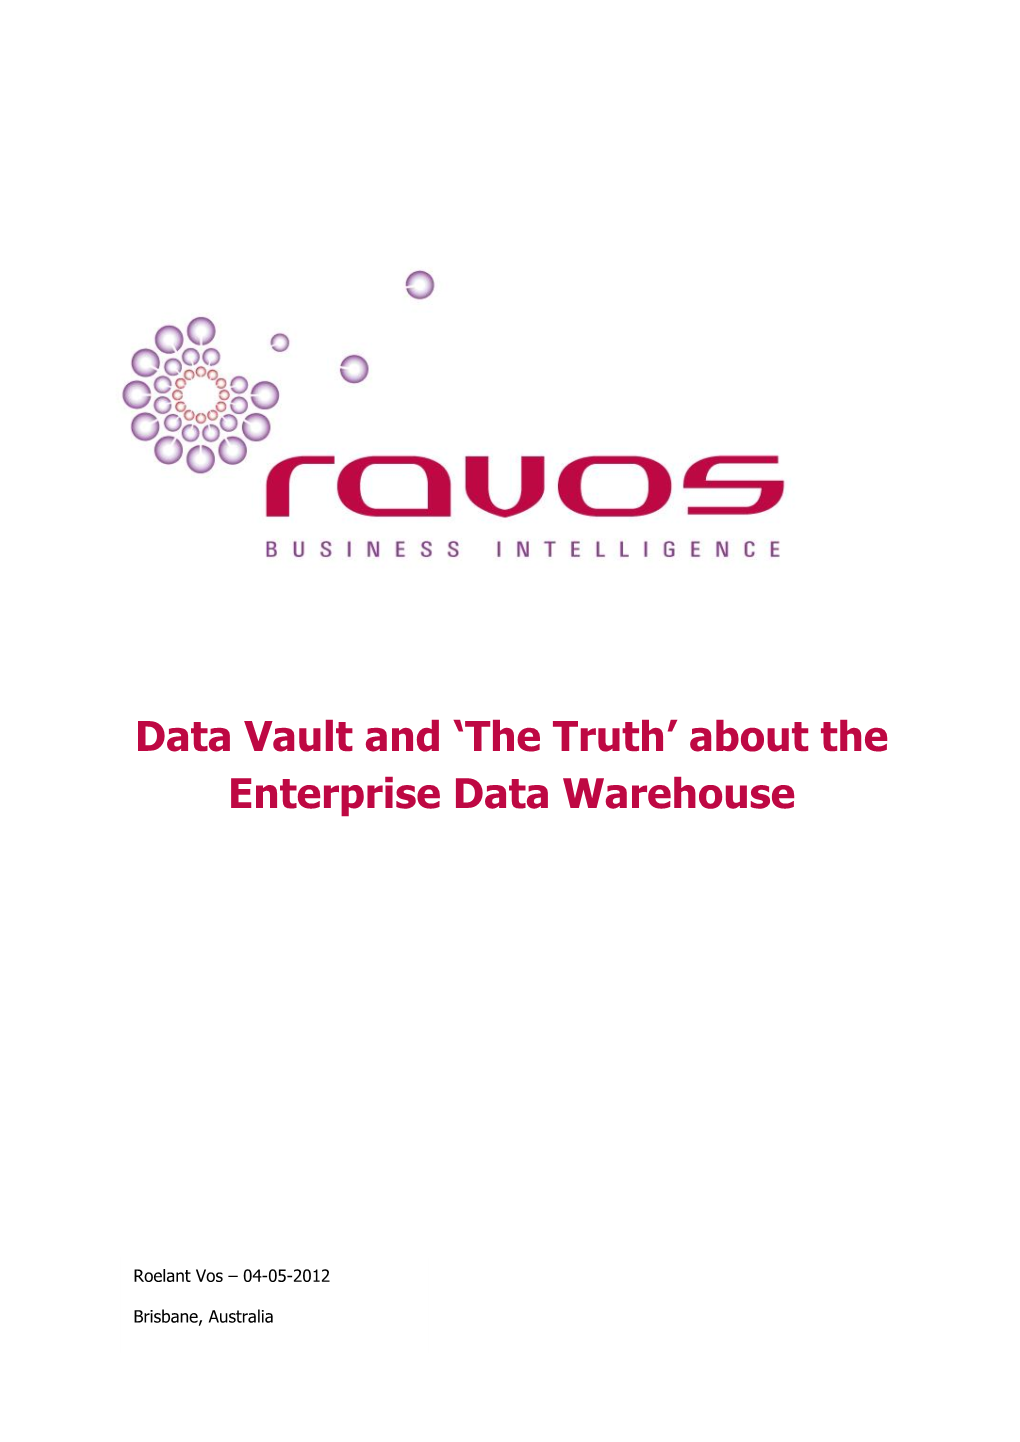 Data Vault and 'The Truth' About the Enterprise Data Warehouse